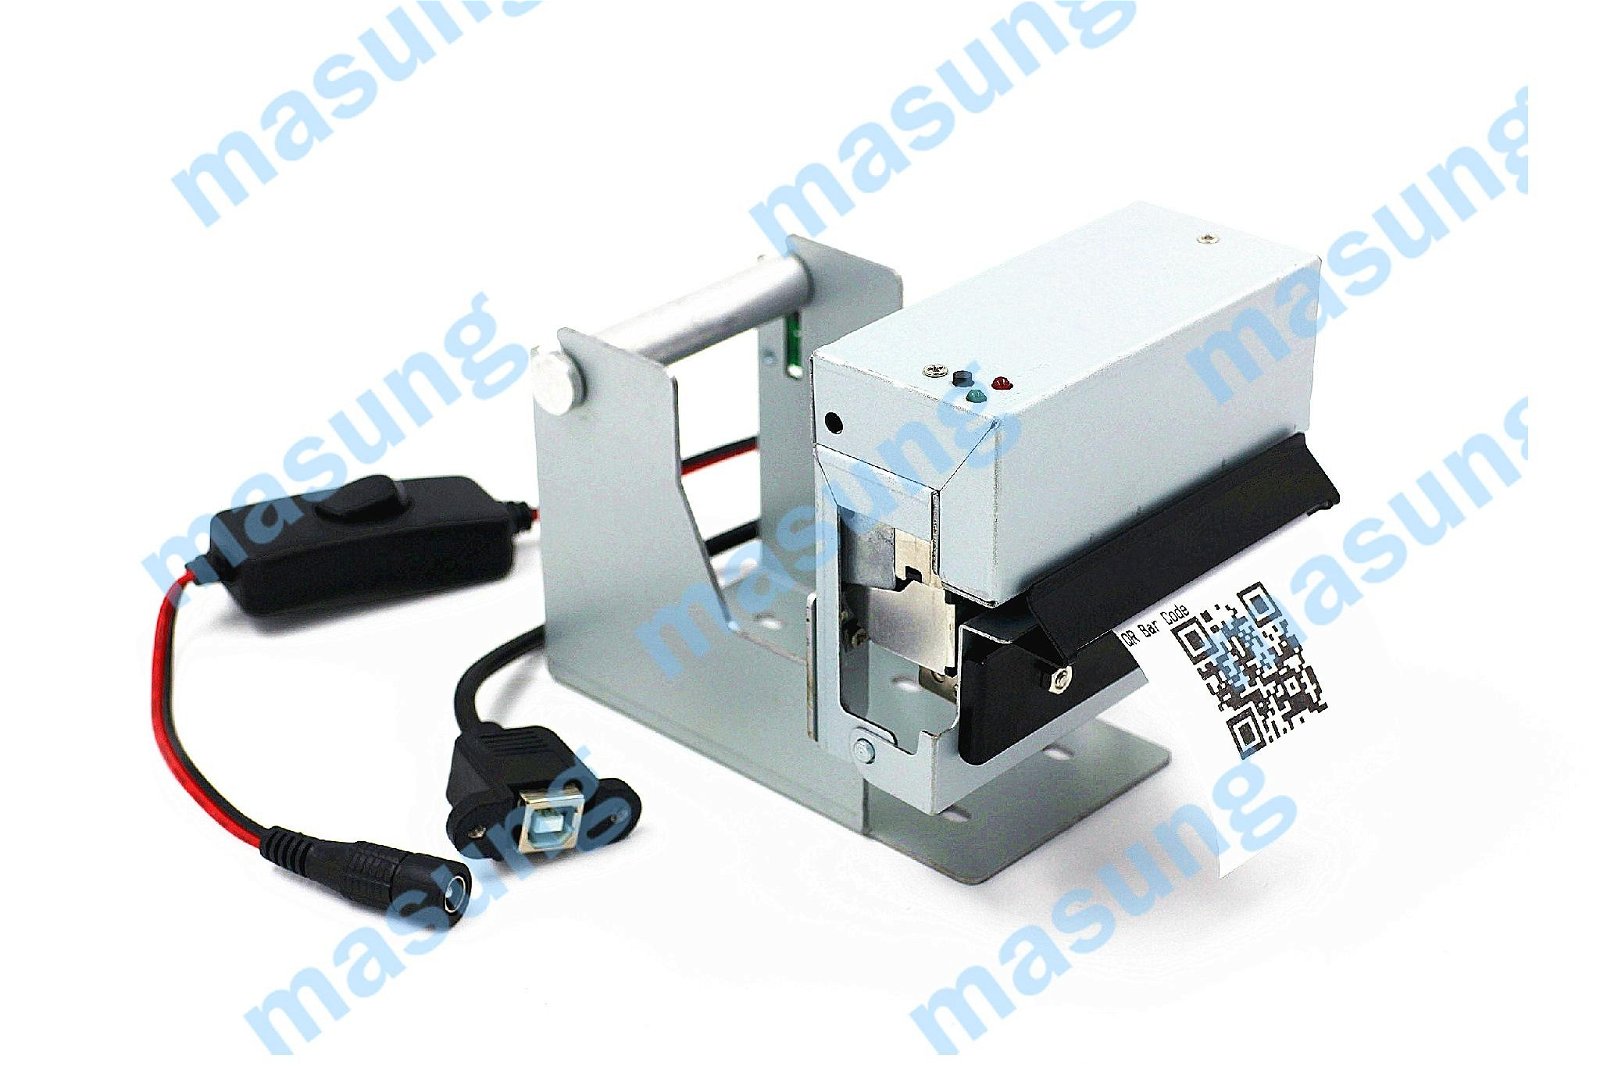 Auto Paper Cutting 58 mm Thermal Printer For Gas Pump Station 2